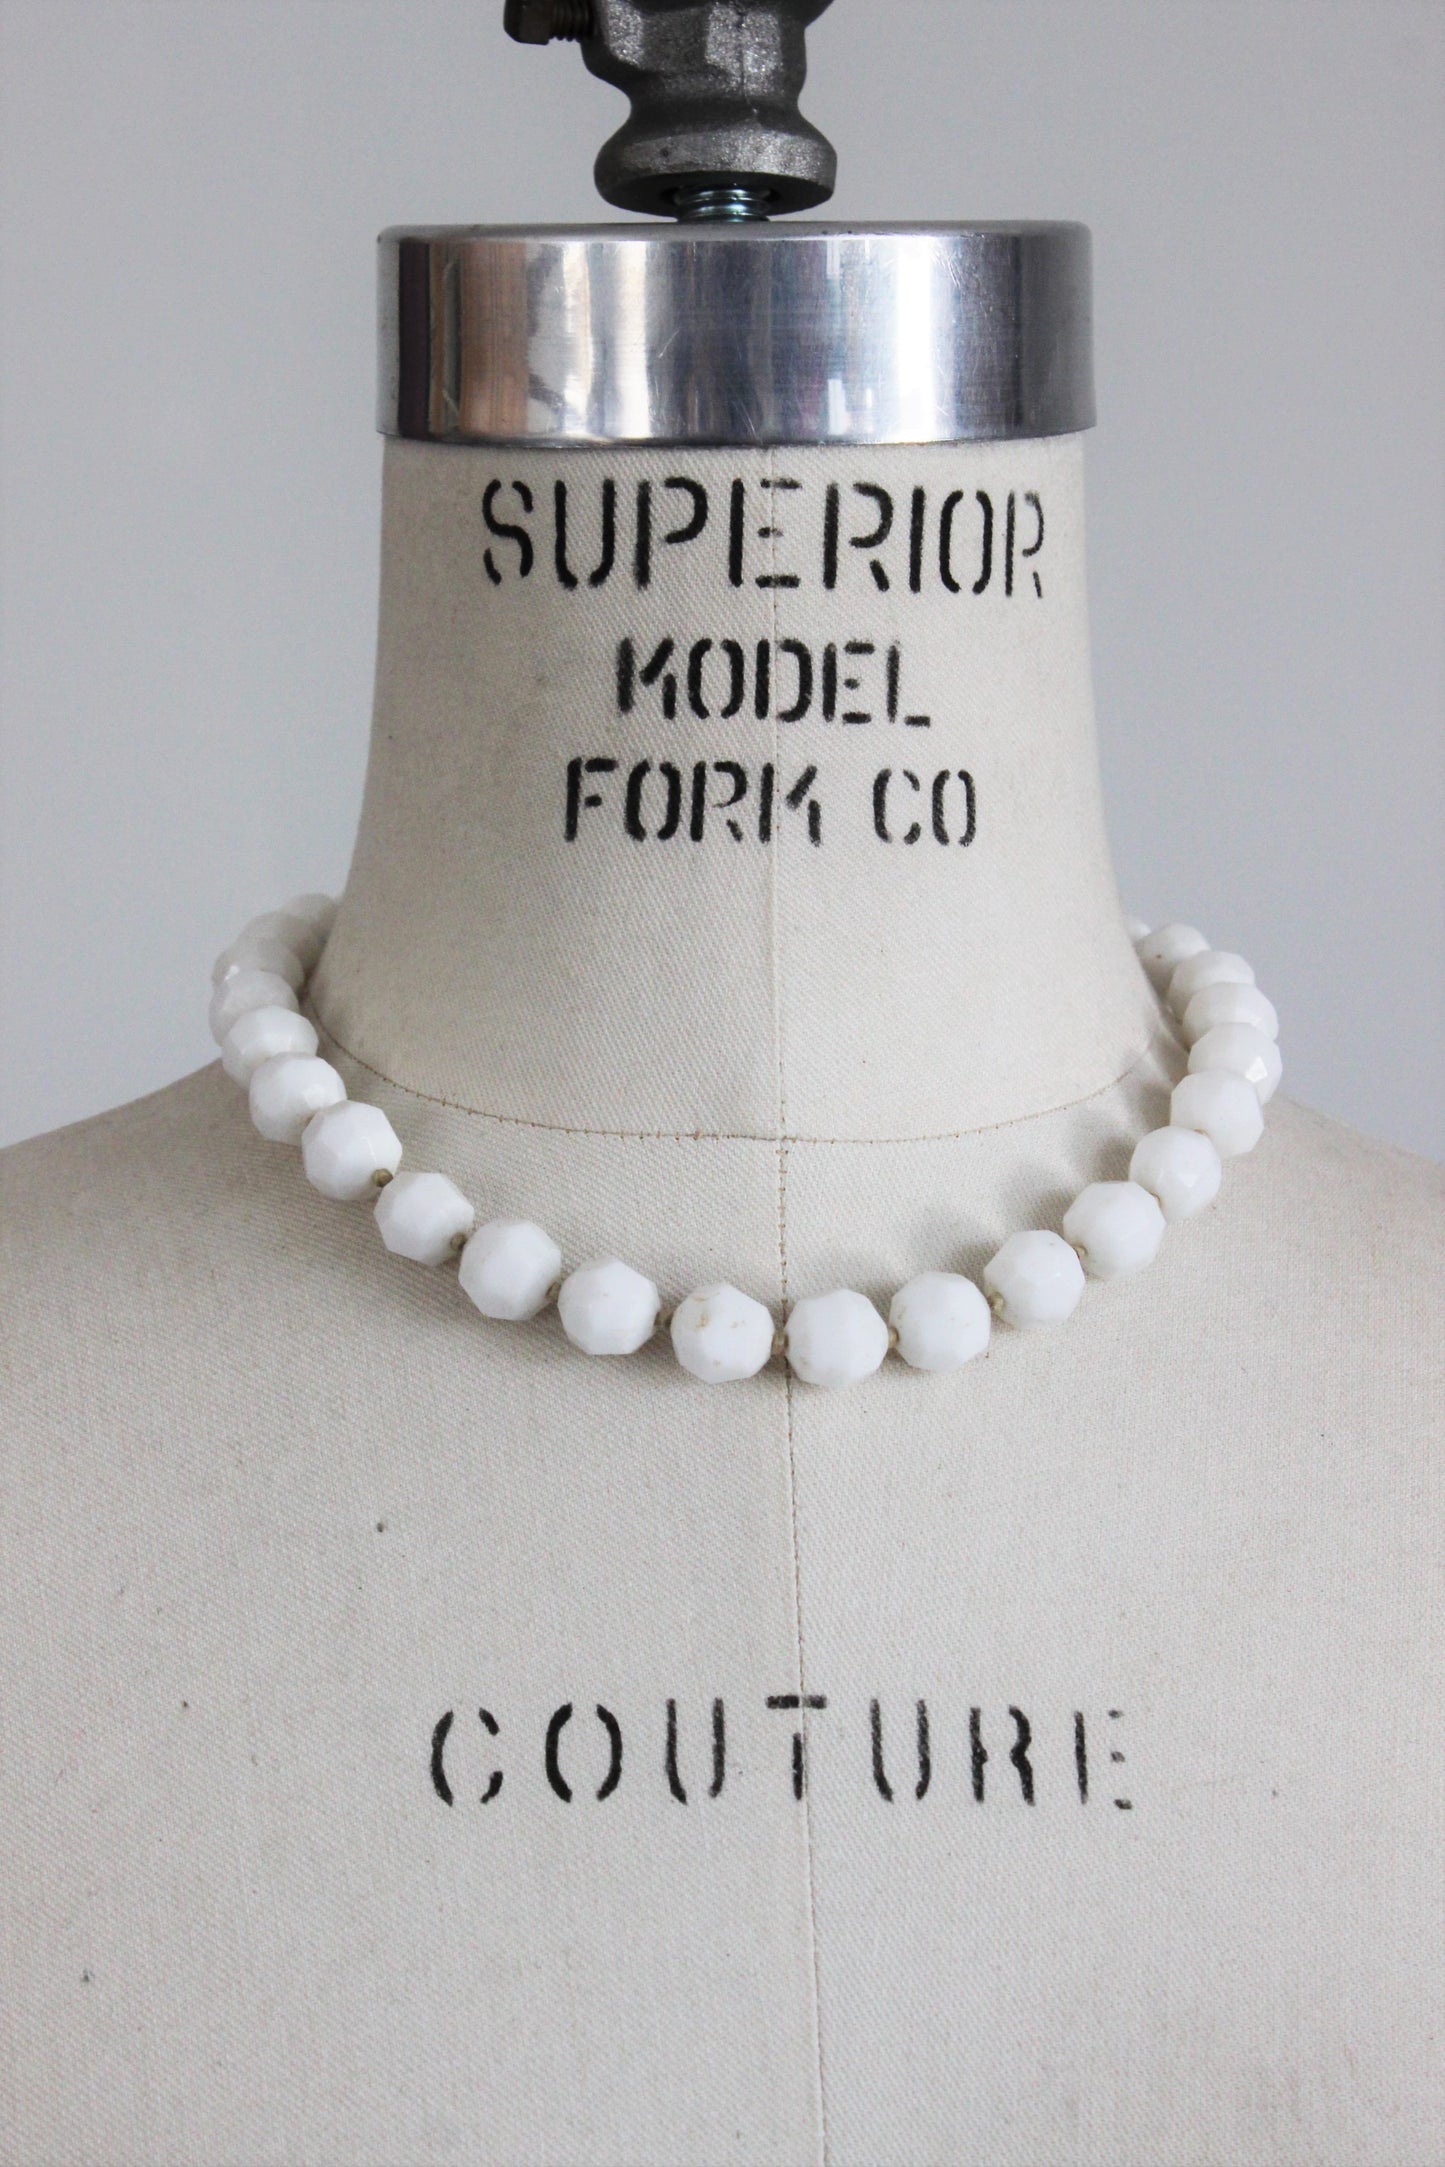 Vintage 1950s White Glass Bead Necklace